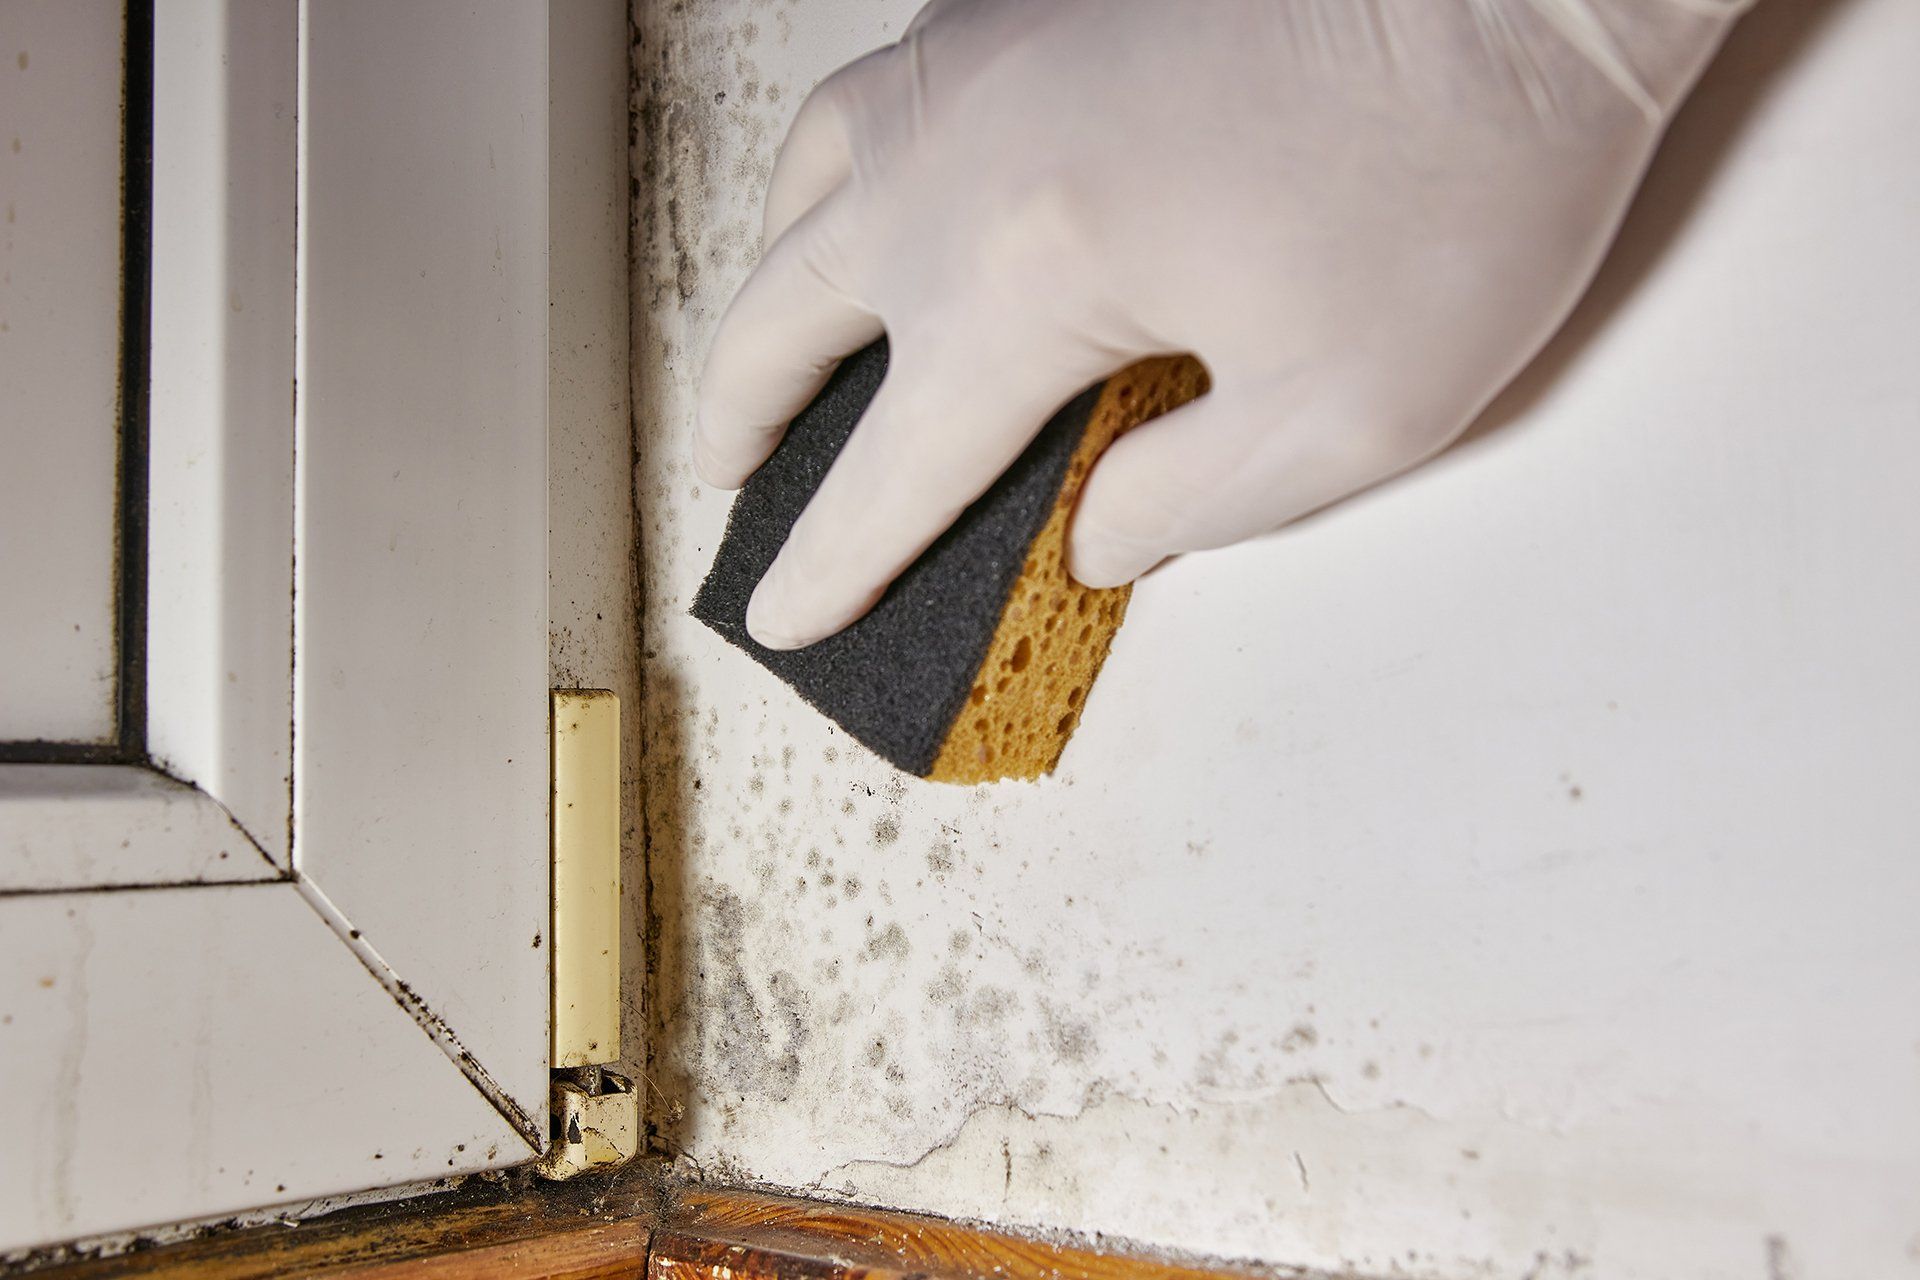 wiping surface mould using a sponge